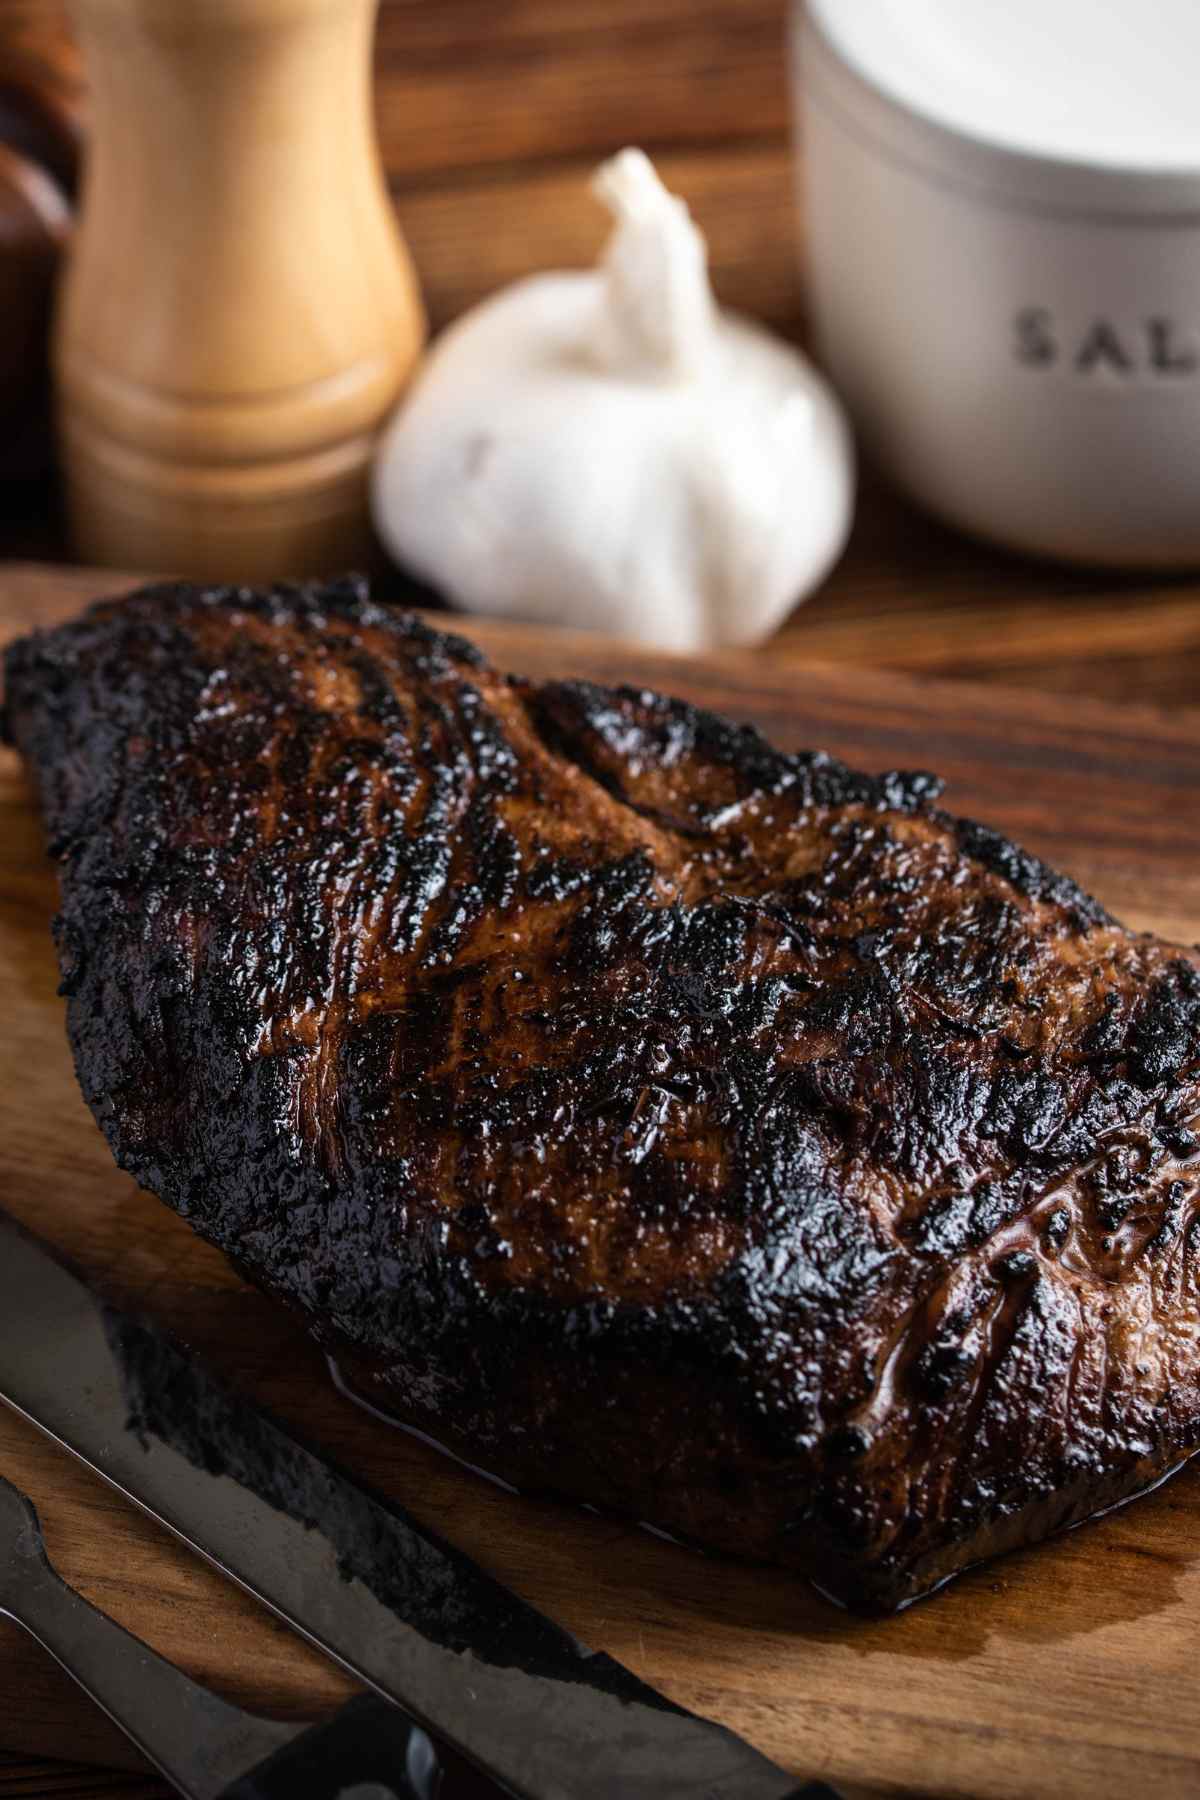 Learn how long to smoke tri tip and secrets for making your smoked beef meat tender and flavorful. In this post, we’ll share with you how to smoke tri tip at different temperatures (such as 225°F or 180°F) so that you’ll cook your smoked tri tip to perfection every time.